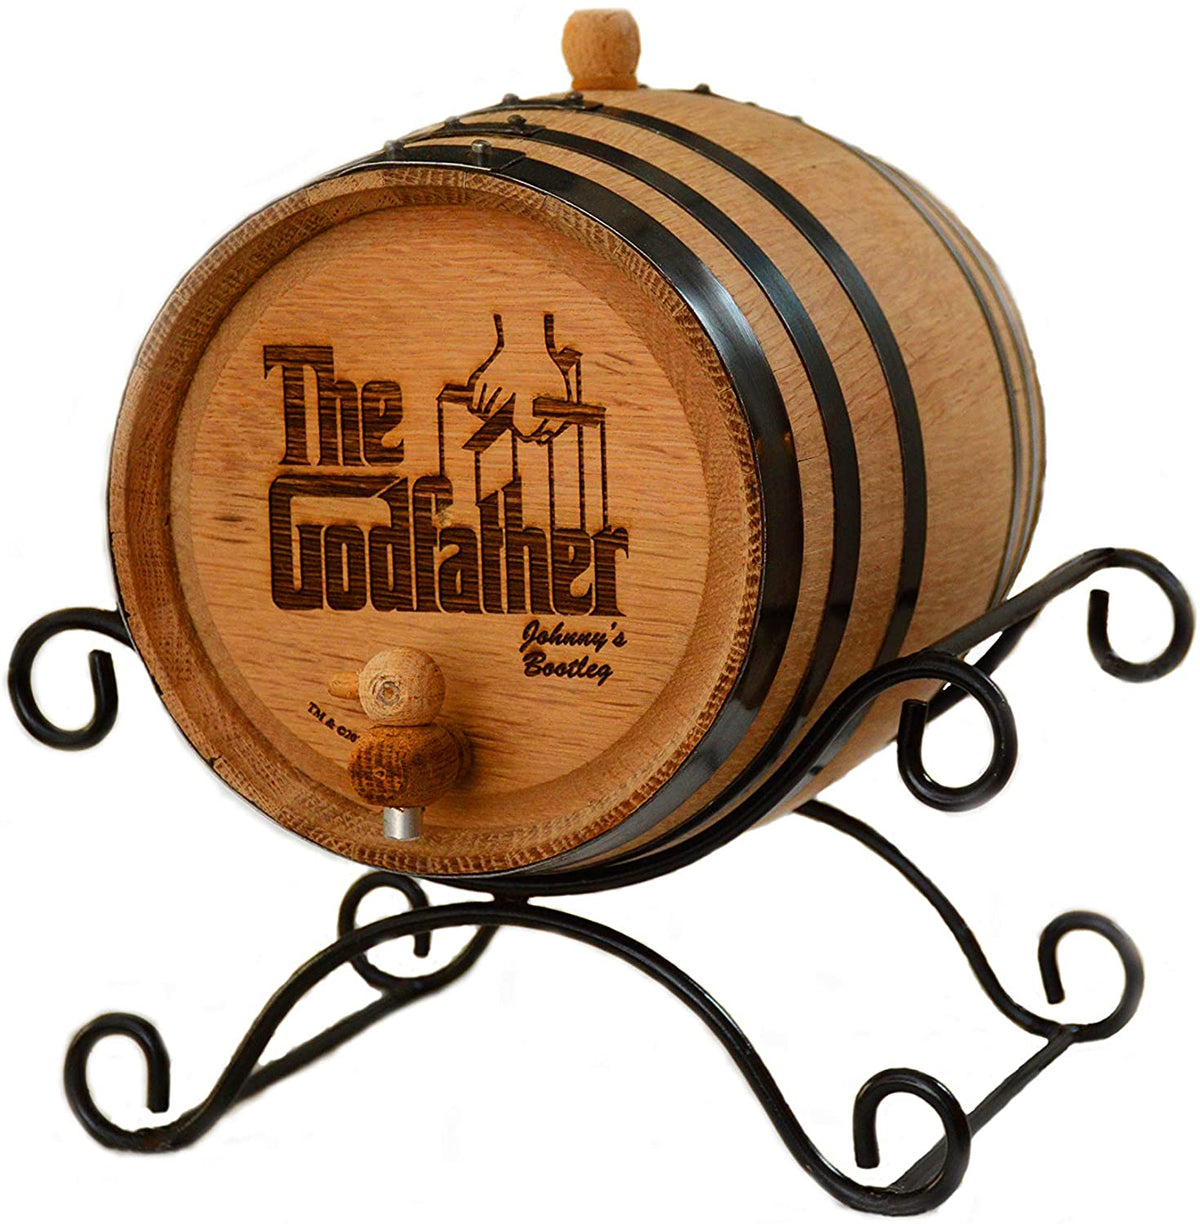 The Godfather Movie Personalized White Oak Barrel Officially Licensed Collectible By Movies On Glass 5 Liter